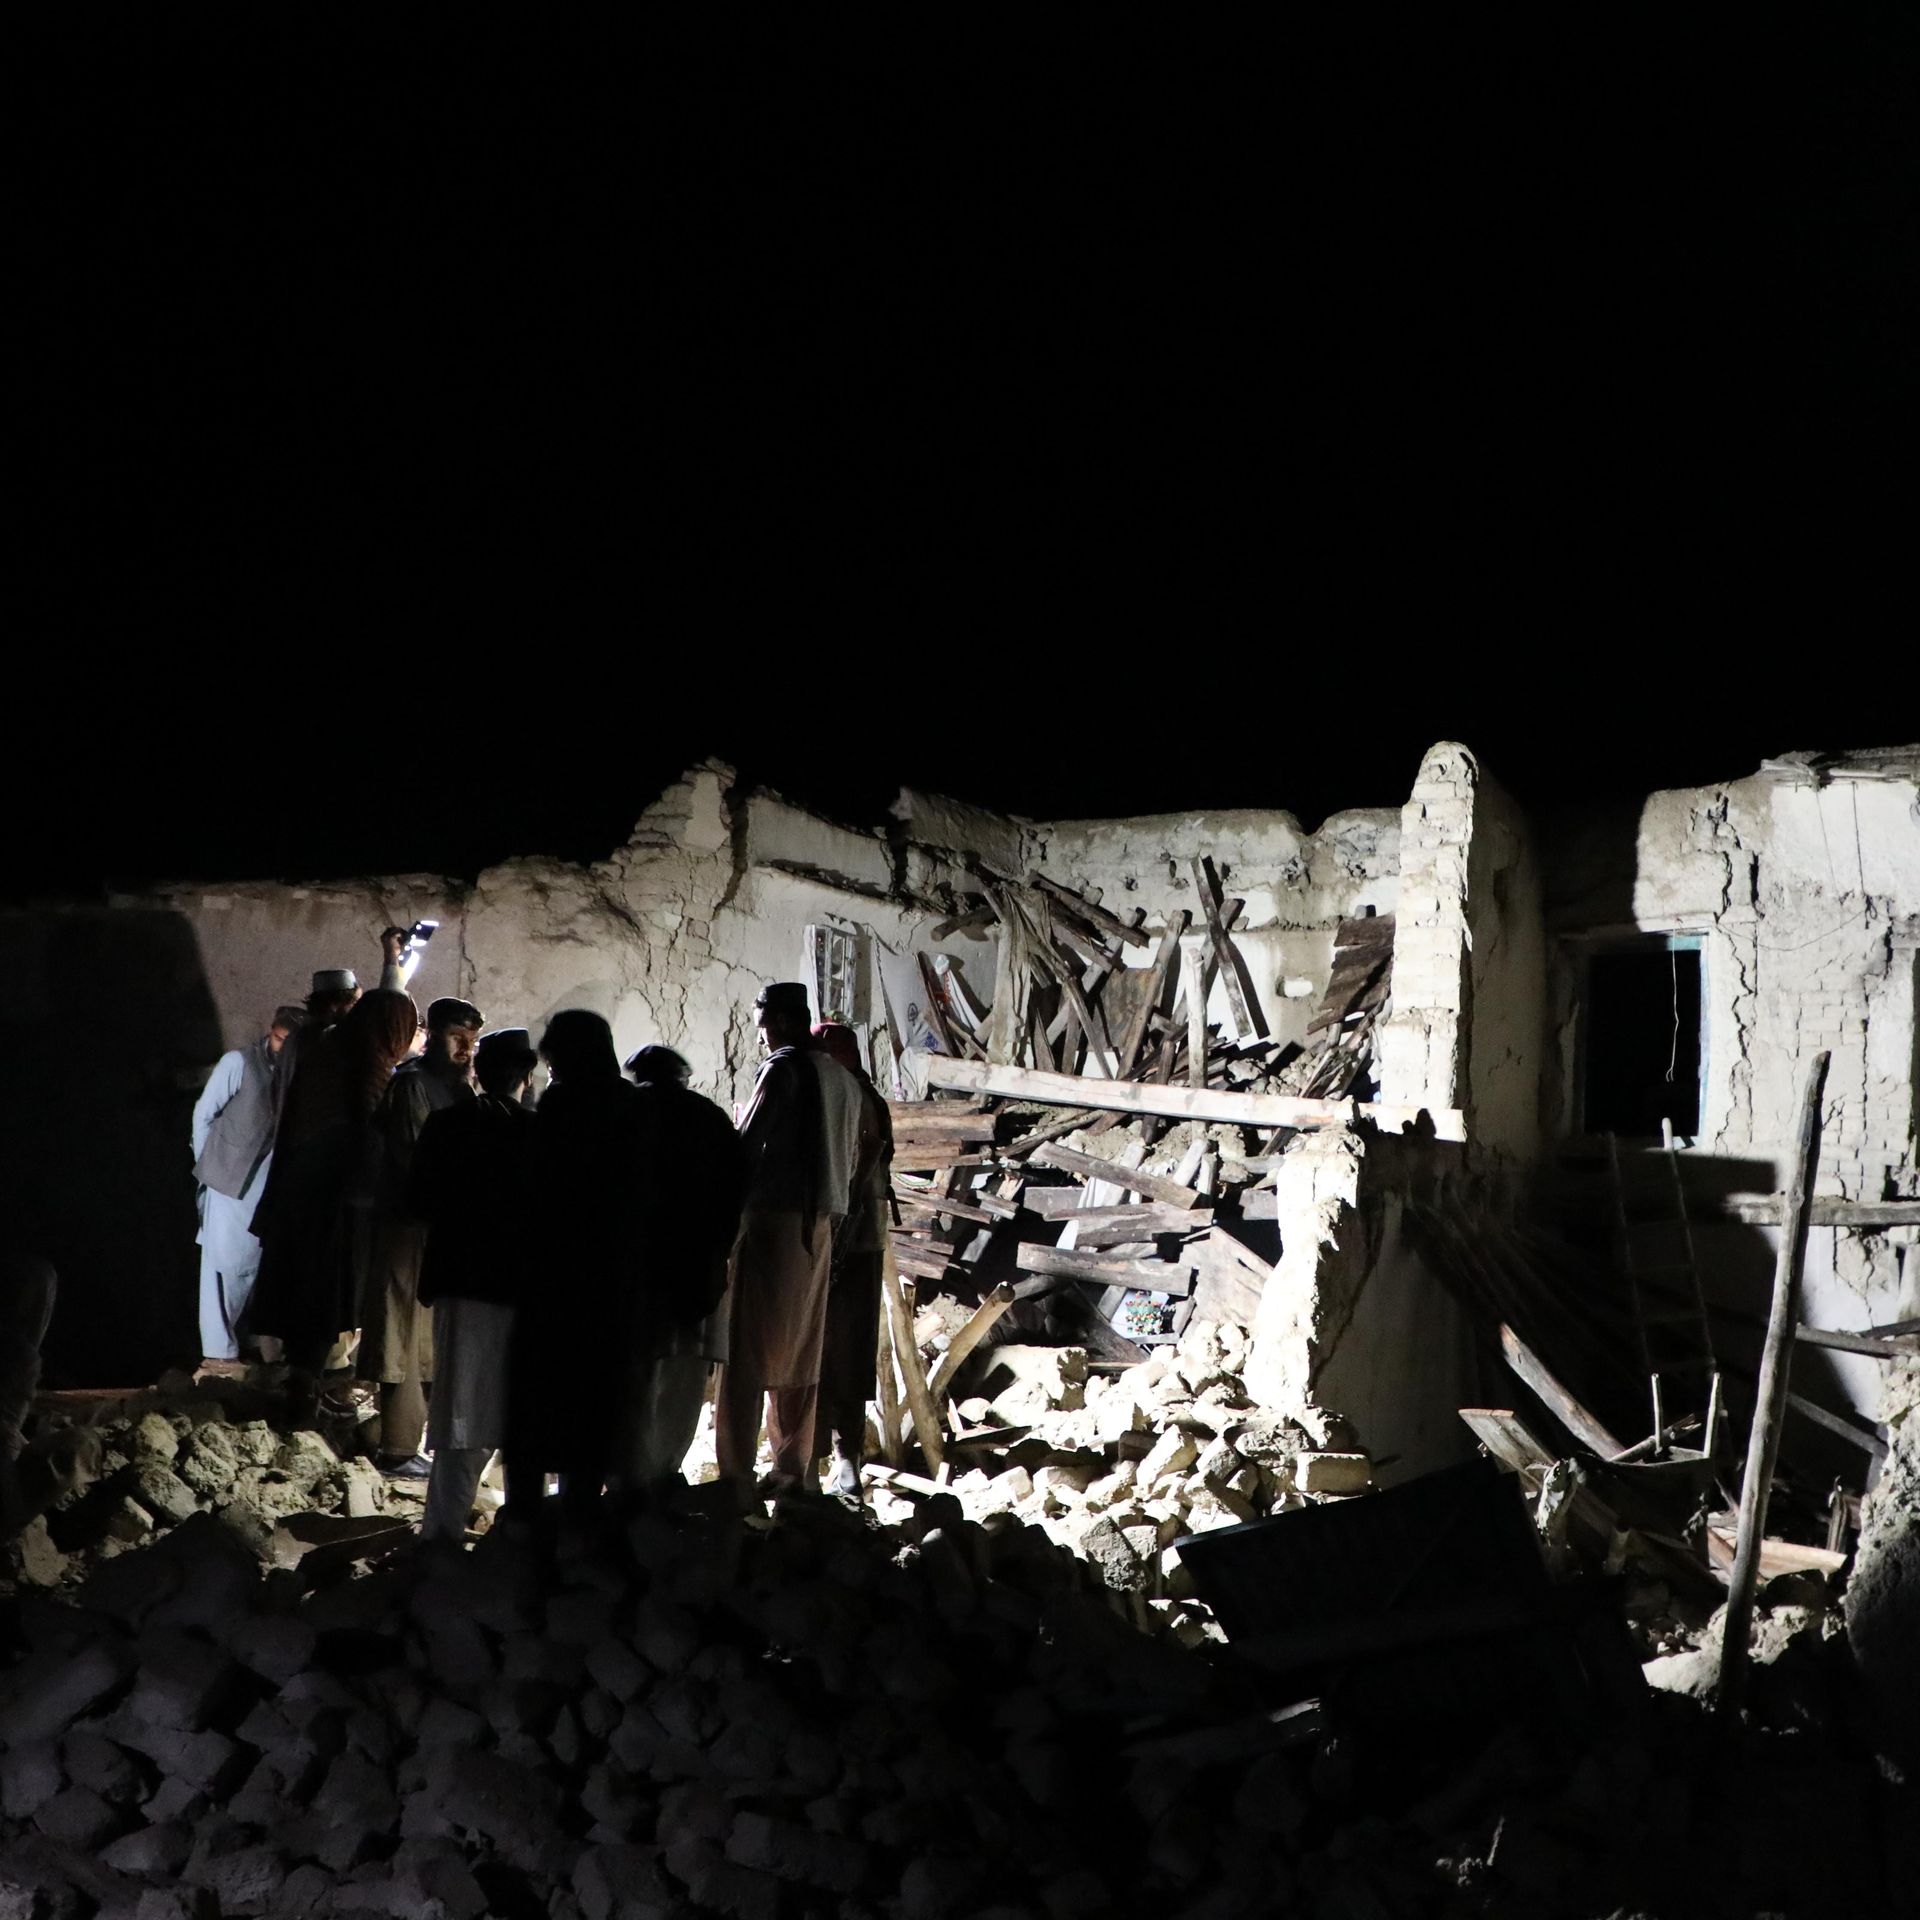 A group of people searching through rubble in the dark. 